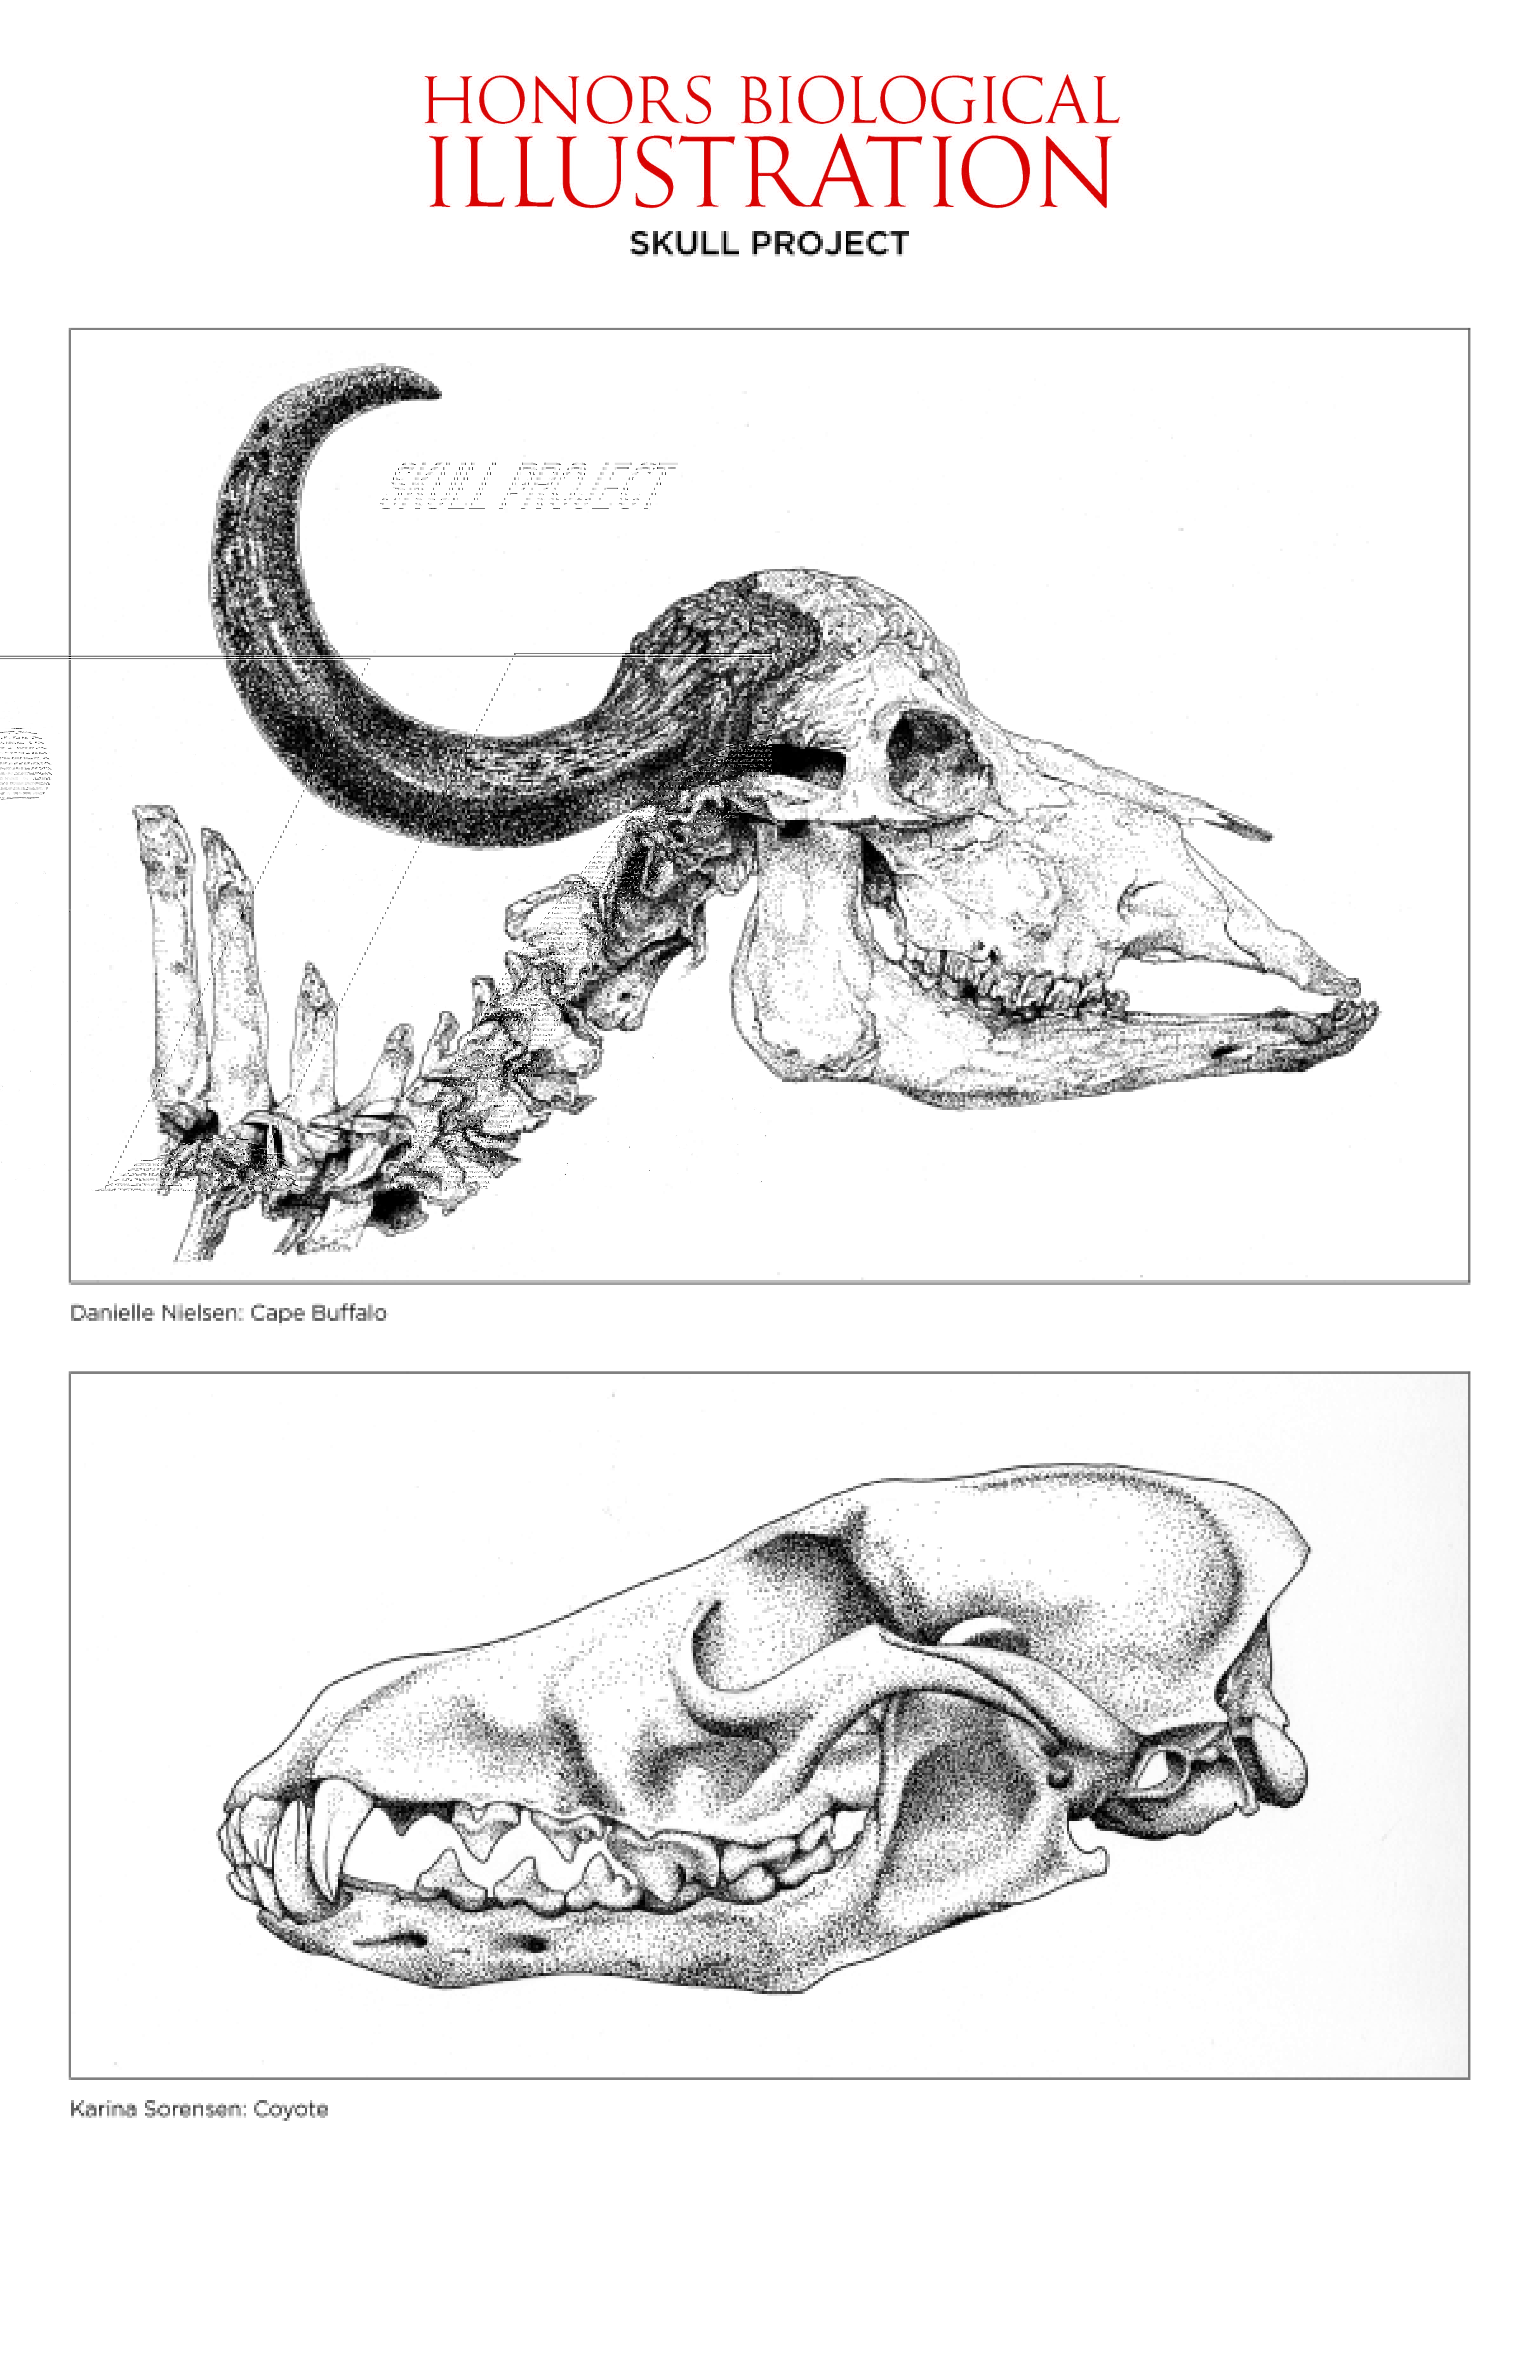 Drawings for Biological Illustration class. At the top is a cape buffalo's head and neck, complete with the right horn. The bottom drawing is of a coyote skull, which is facing the left.